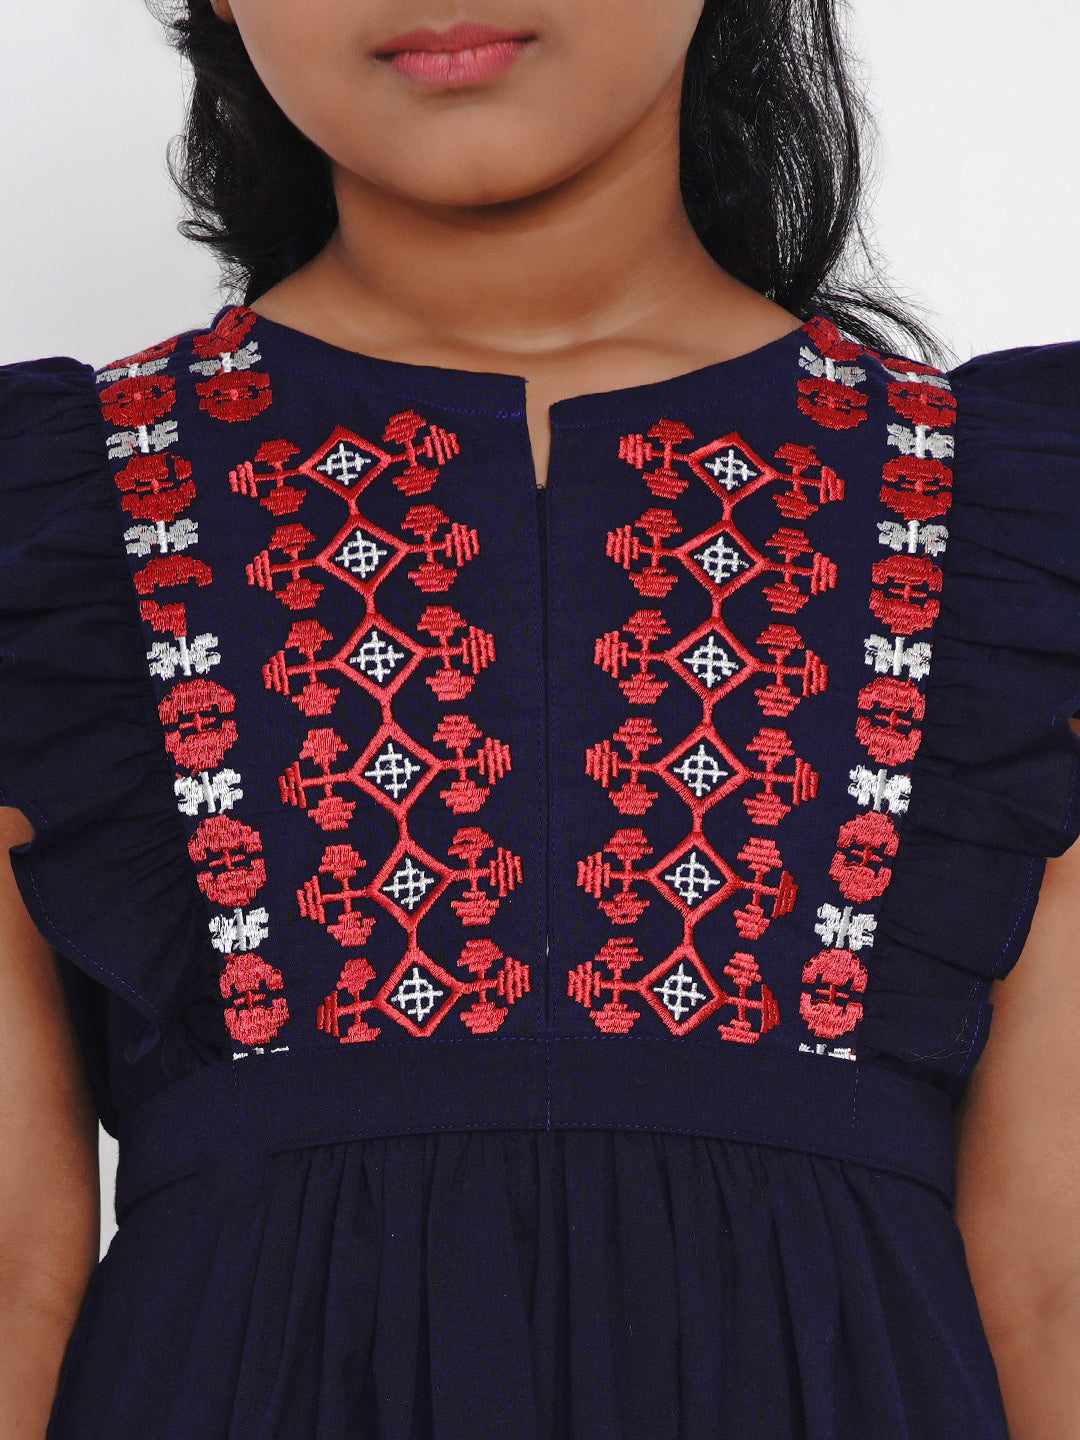 Bitiya By Bhama Girls Navy Blue Embroidered Fit And Flare Dress